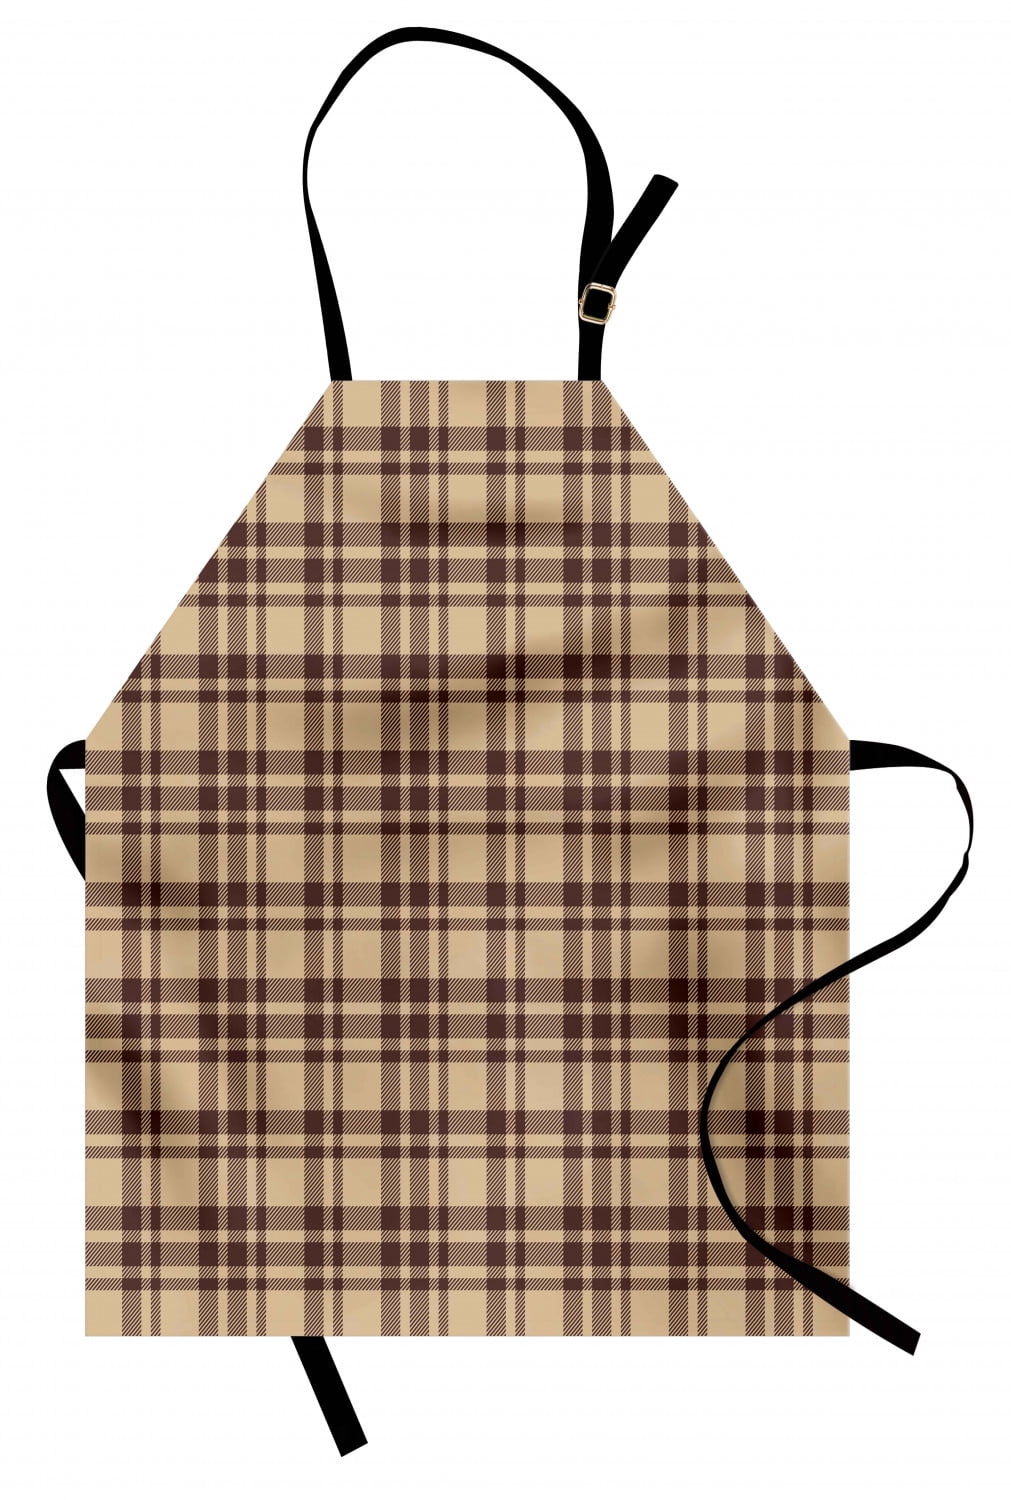 Flower Dot Plaid Home Kitchen Bib Cooking Baking Barbecue Apron with Pocket Cozy 